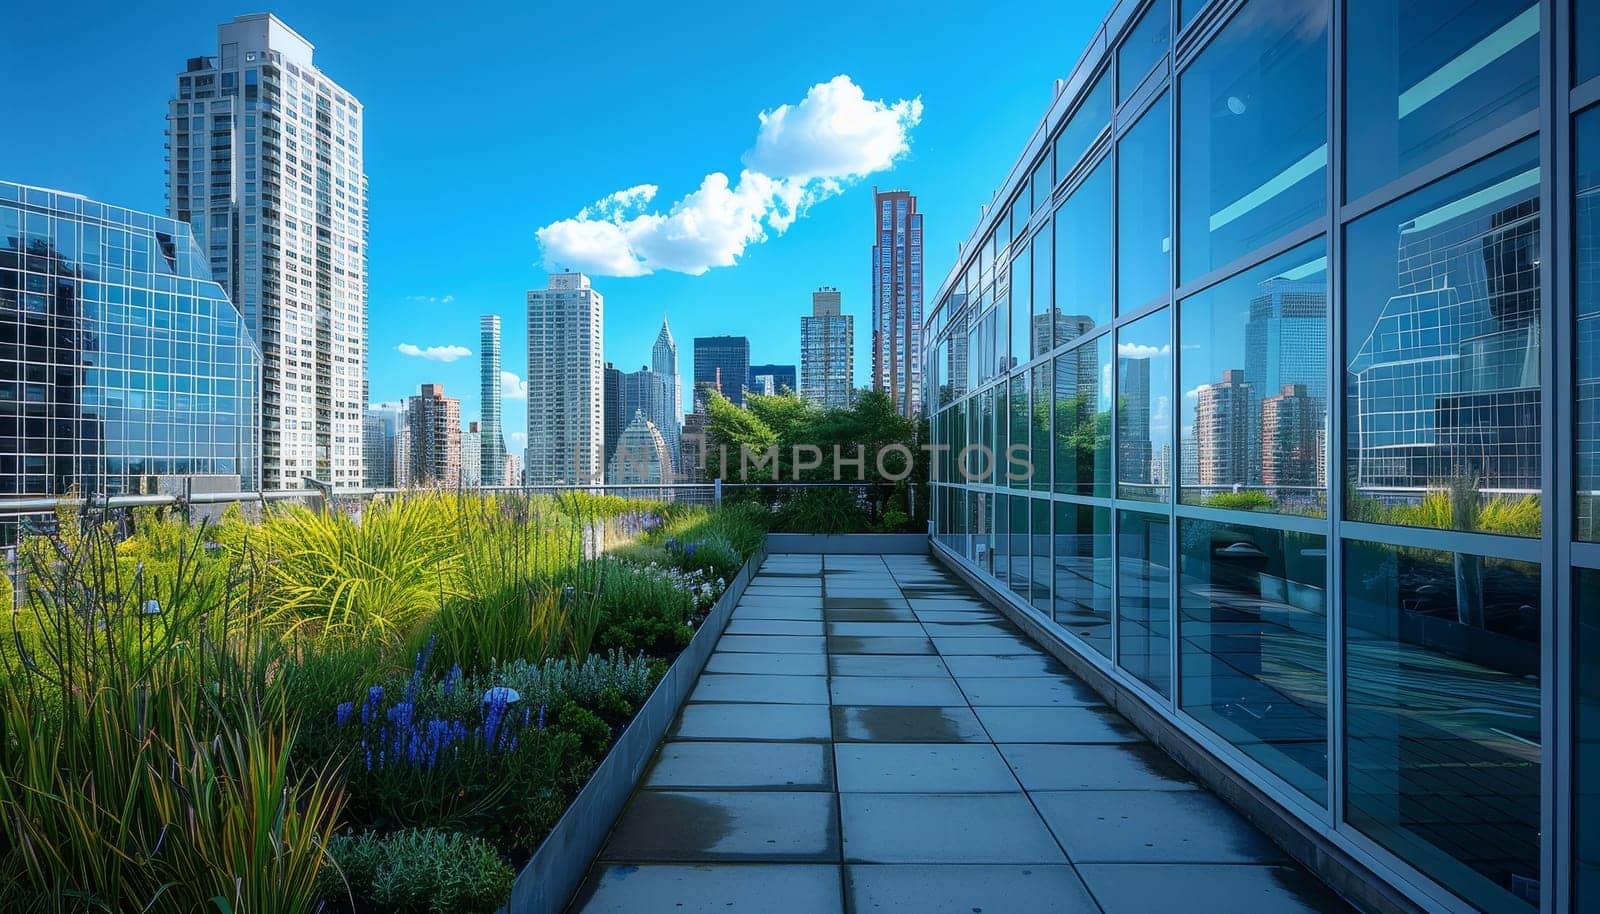 A cityscape with a glass roof and a green garden by AI generated image.